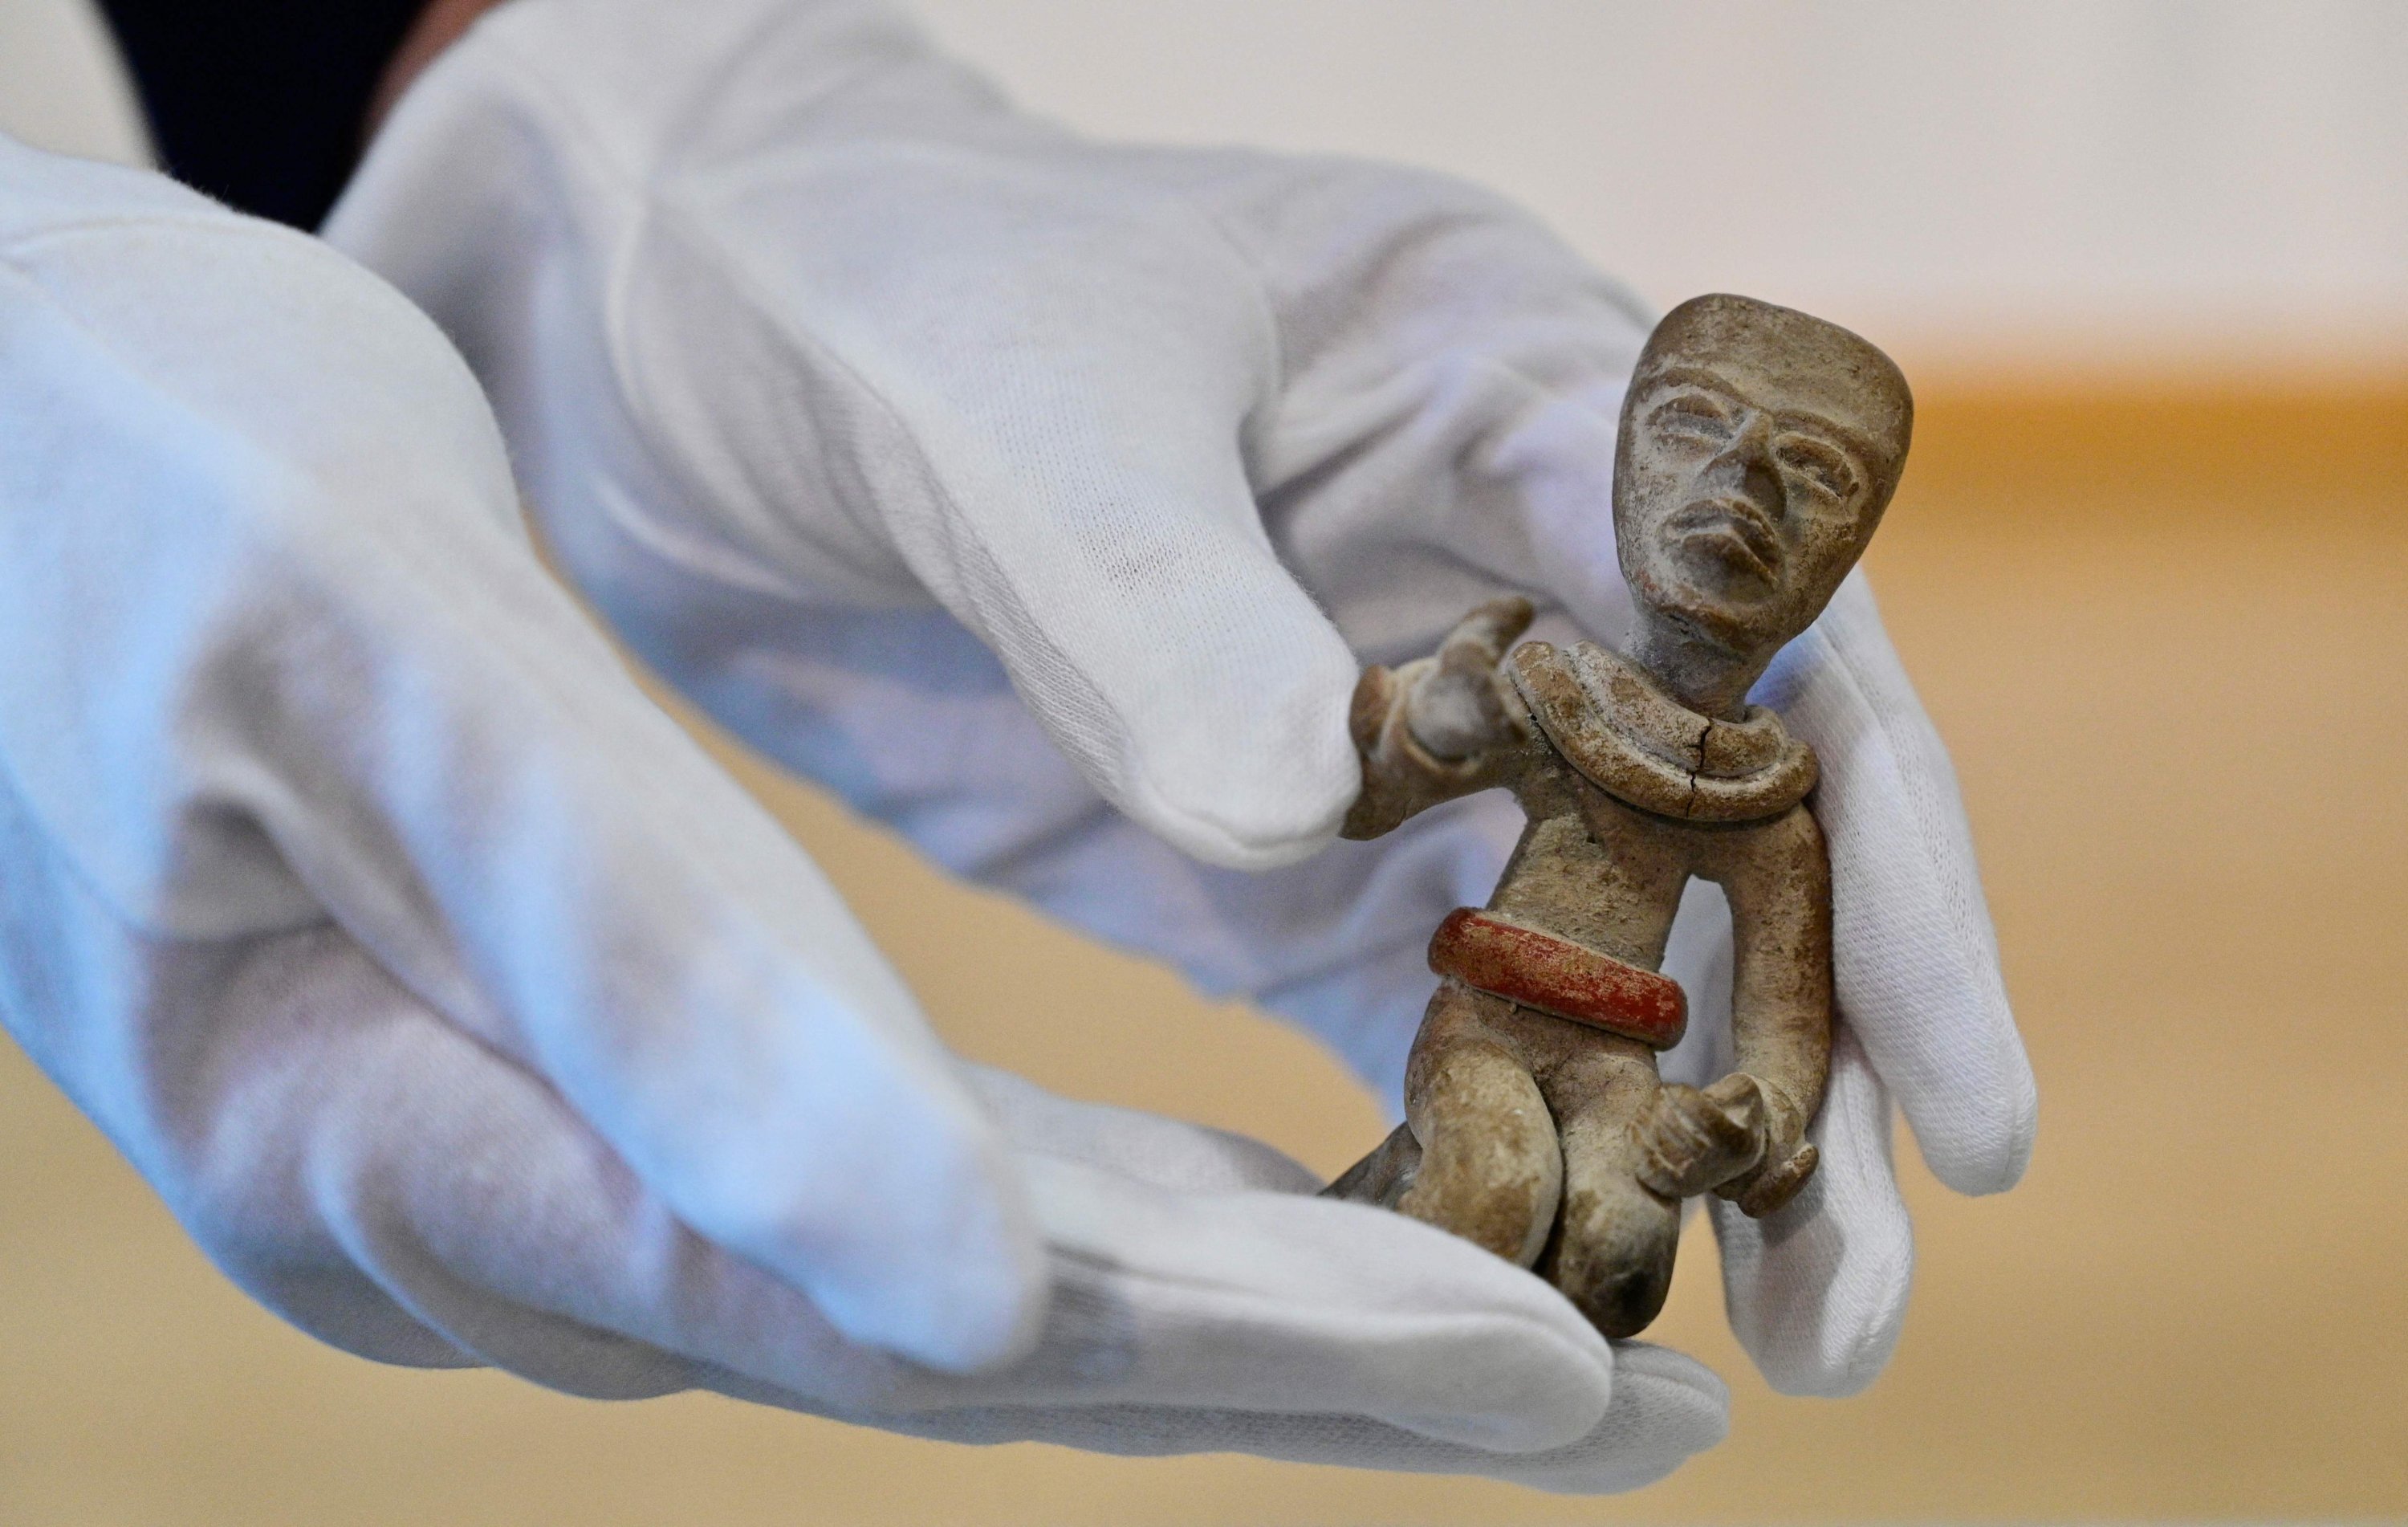 A person holds a 'Kneeling Figure' during a handing over ceremony of a small trove of Mayan cultural artifacts being returned to Mexico and Guatemala in Berlin, Germany, Nov. 5, 2021. (AFP Photo)